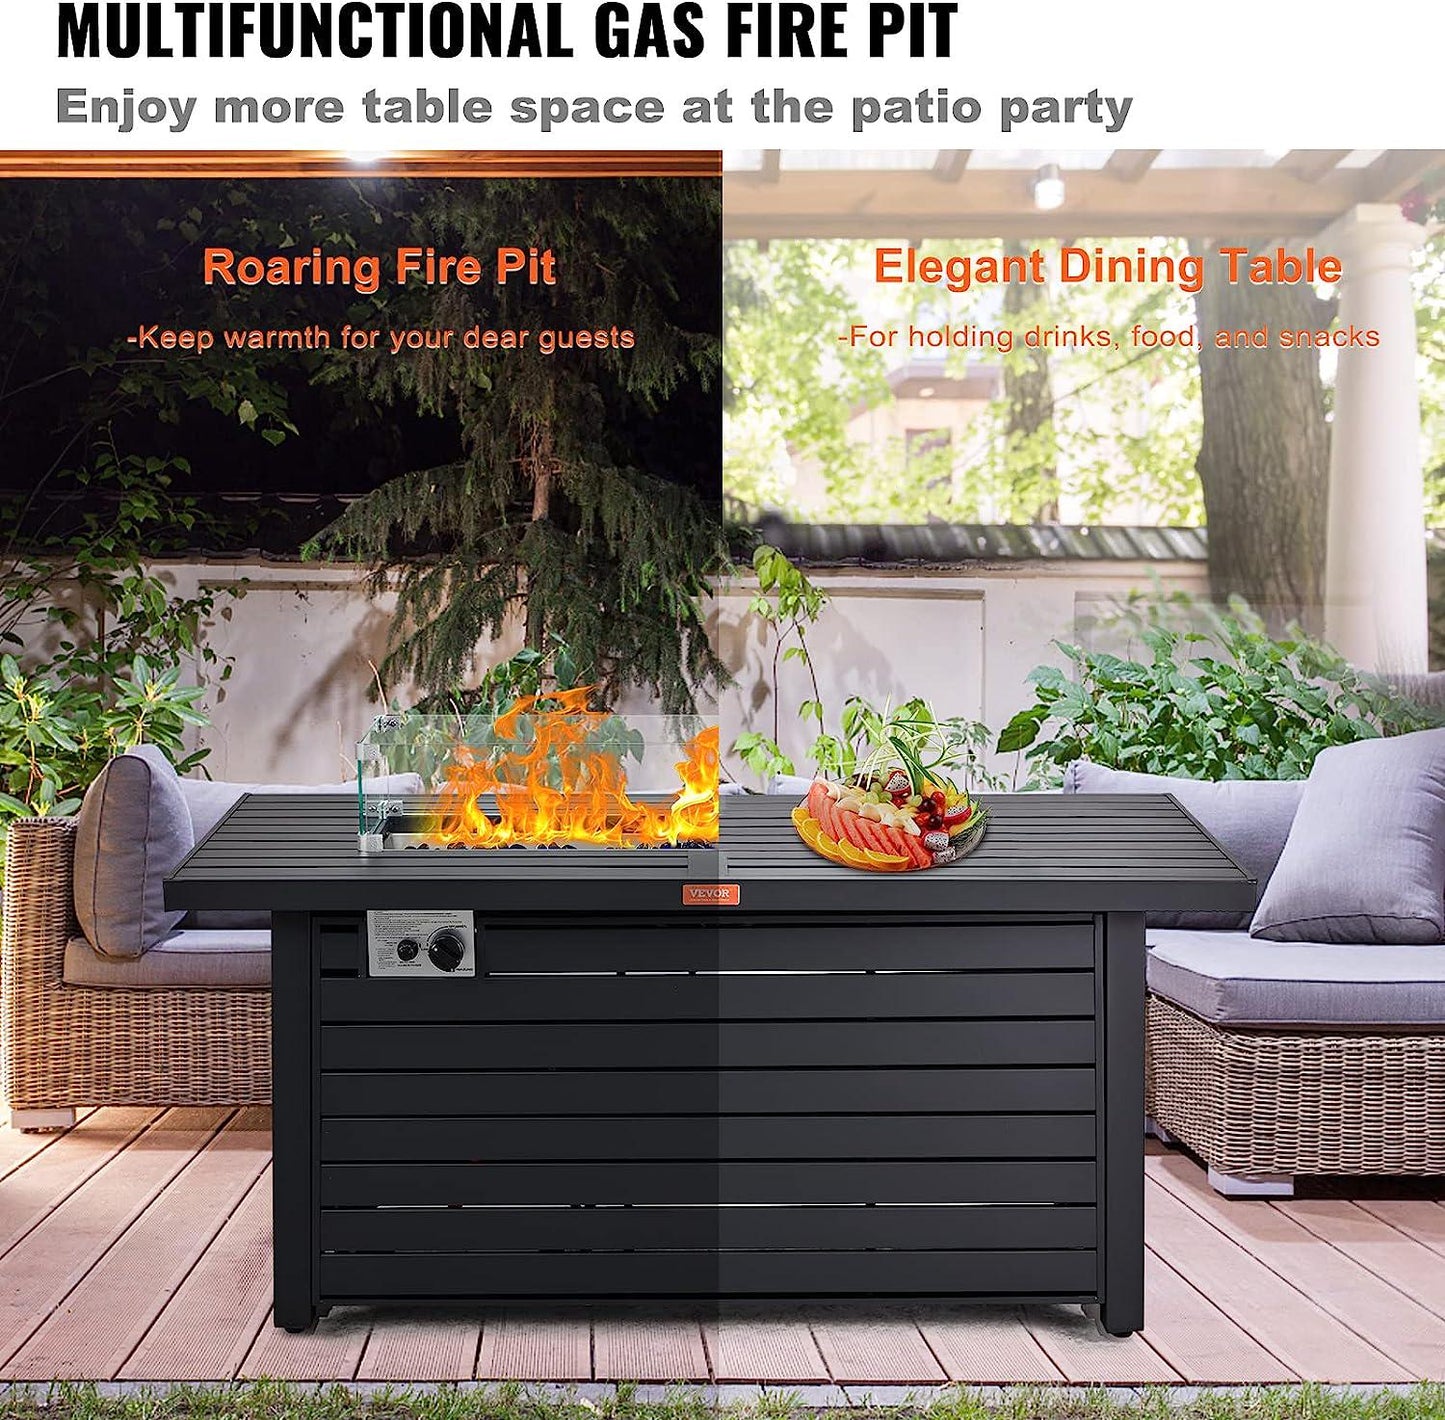 Gas Fire Pit Table, 54 In 50000 BTU, Propane Outdoor Wicker Patio fire Pits with Carbon Steel Tabletop, Lava Rock, Glass Wind Guard, Cover, Add Warmth to Gathering on Garden Backyard, CSA Listed